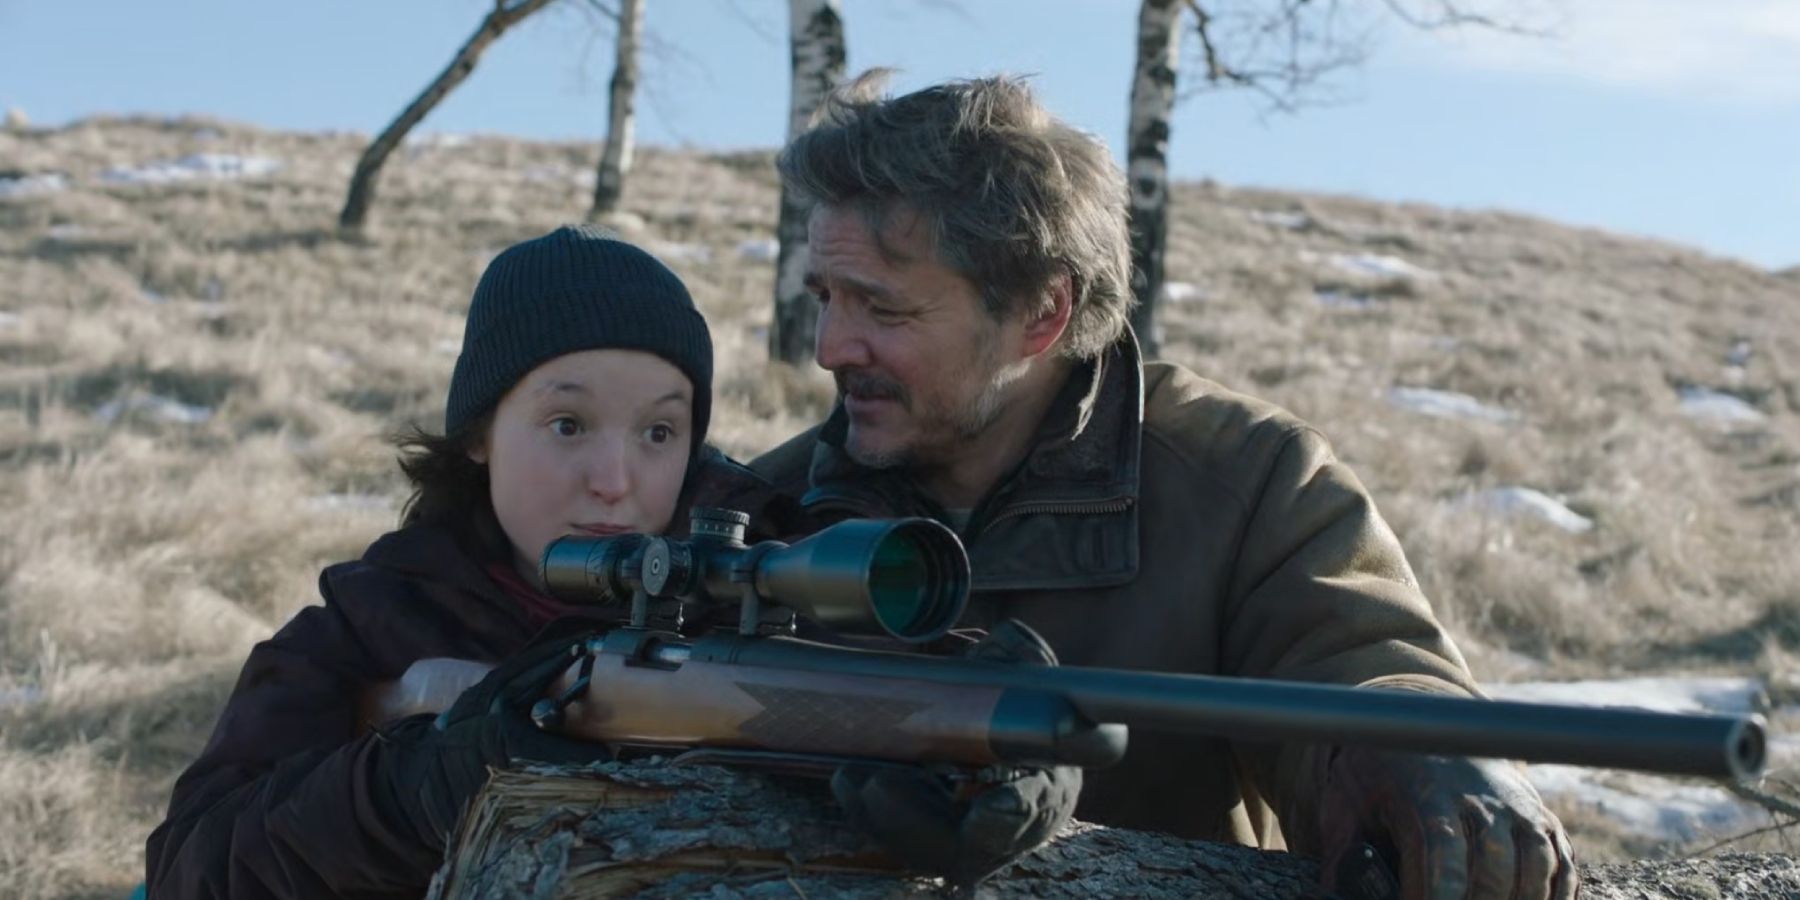 The Last of Us Bella Ramsey as Ellie and Pedro Pascal as Joel shooting rifle